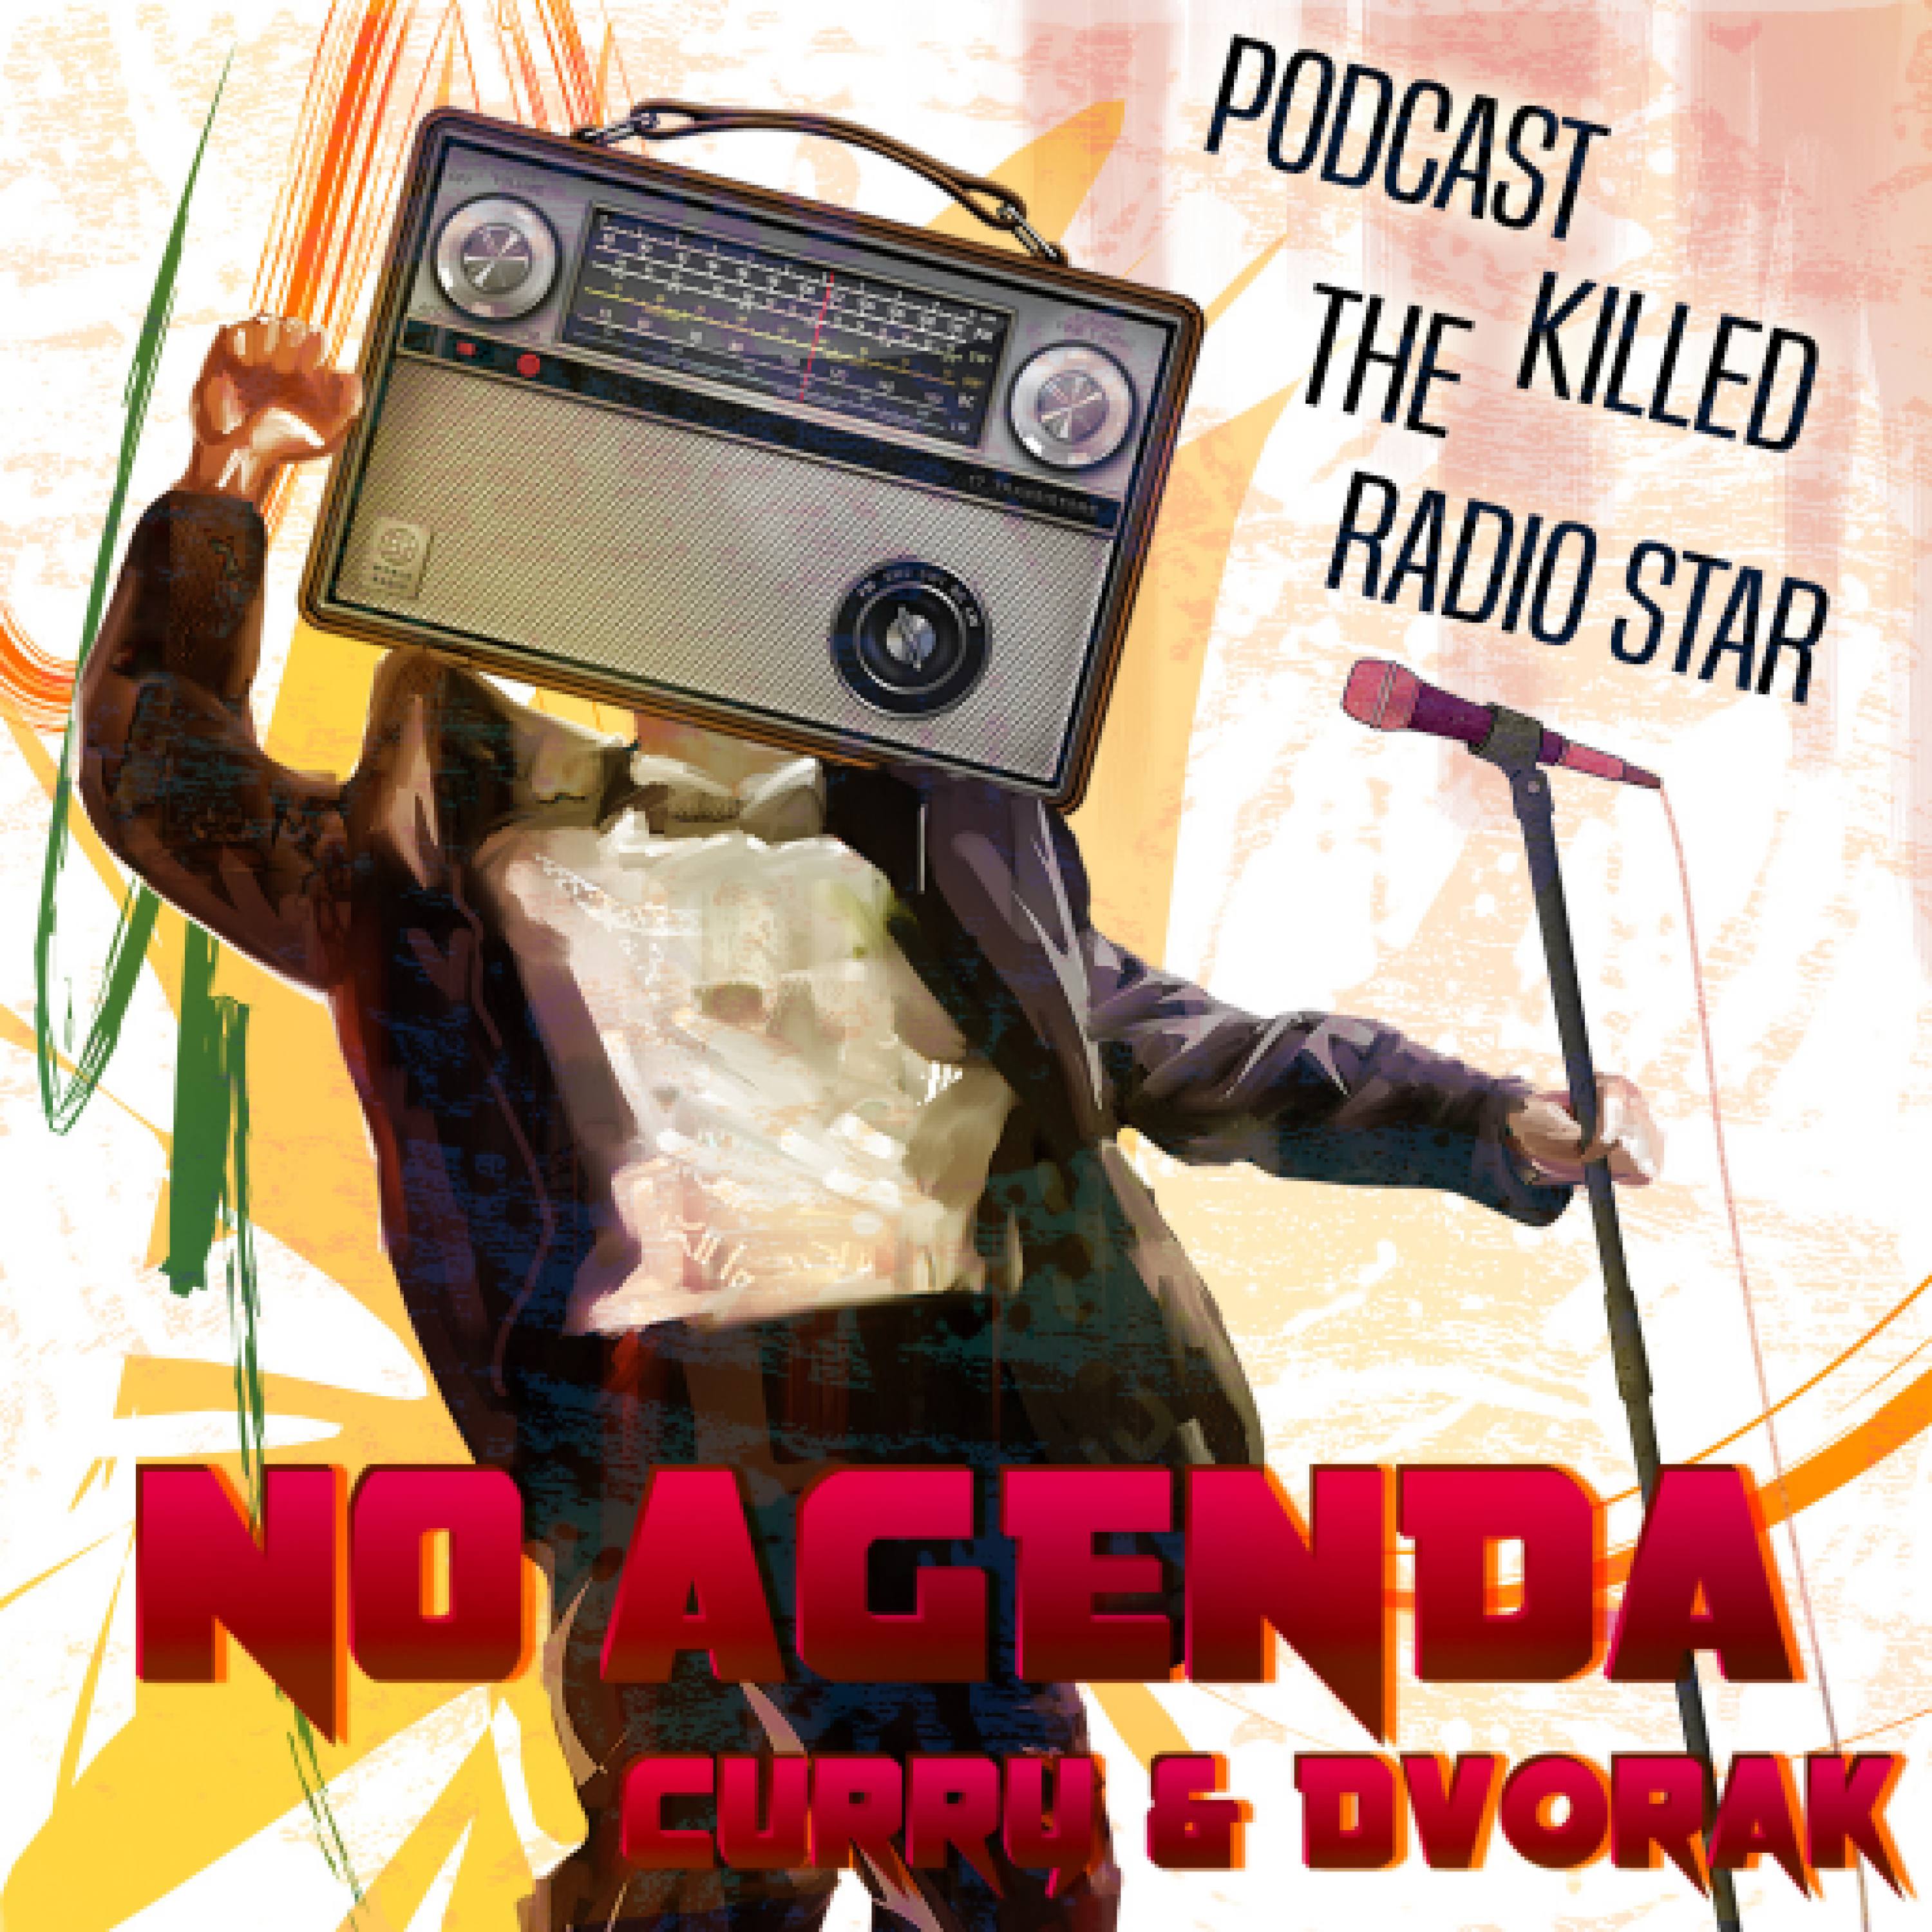 Podcast Killed the Radio Star by nessworks for 